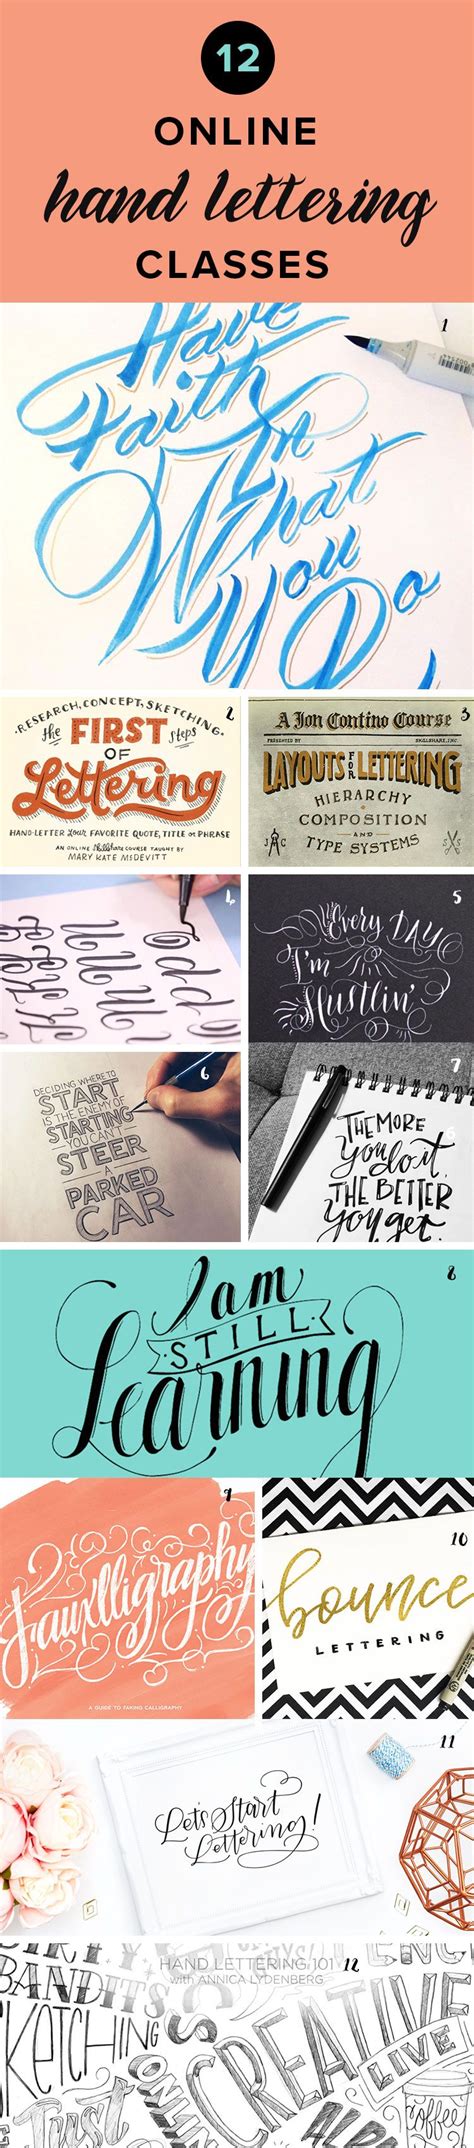 Want To Learn Hand Lettering Check Out These Awesome Online Classes